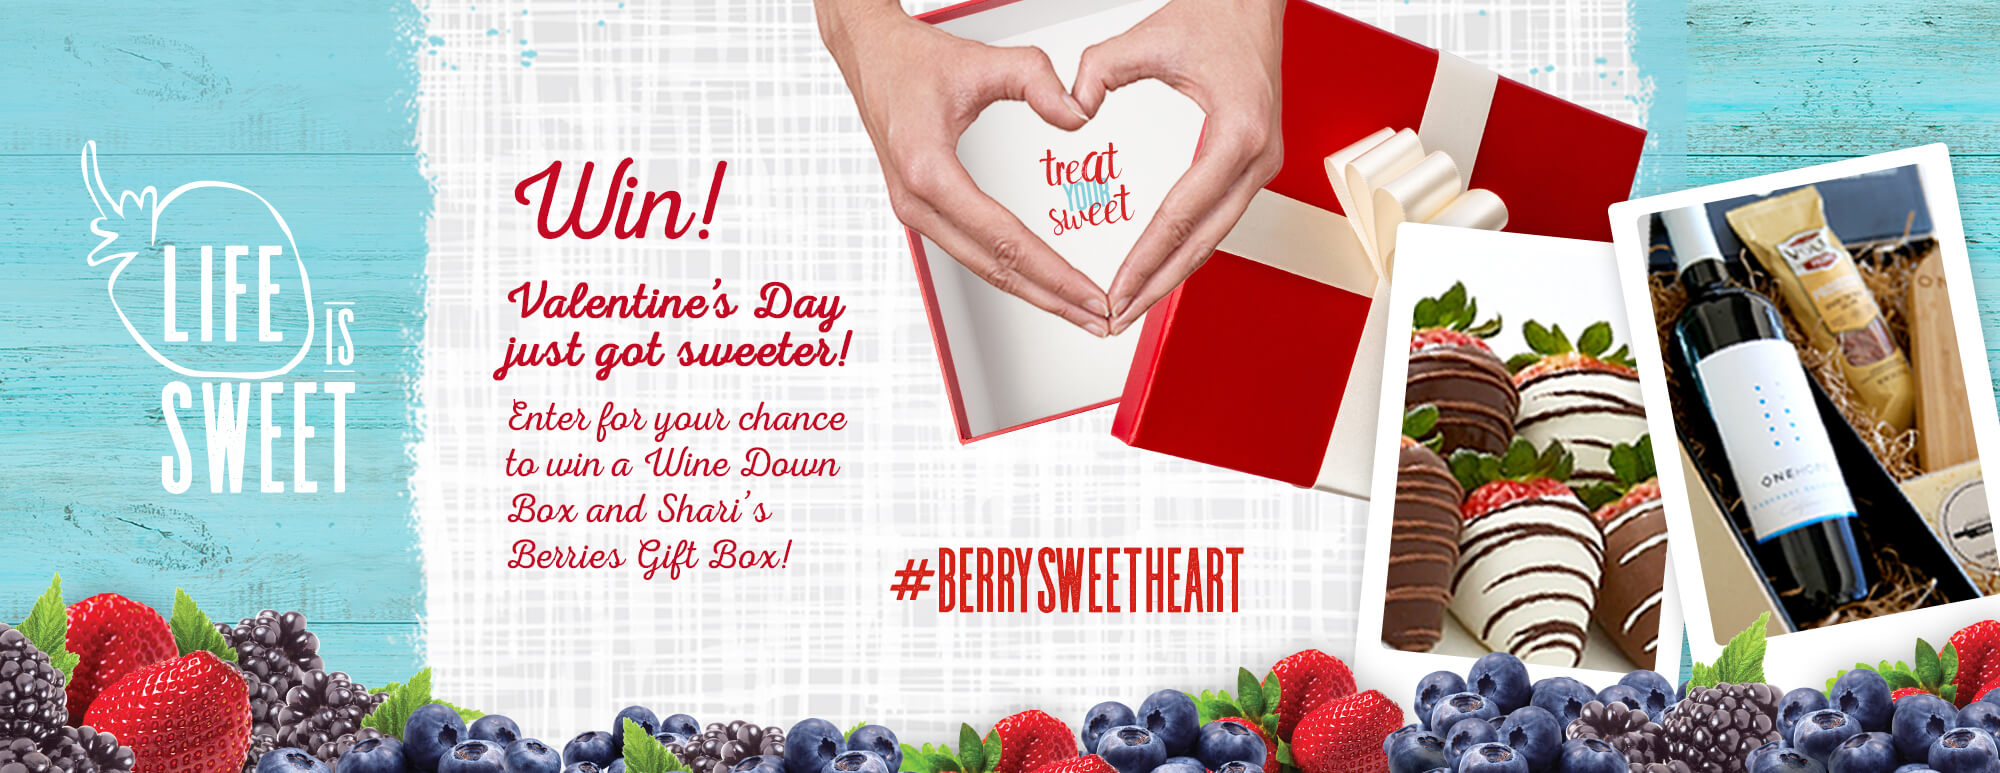 Life is Sweet Giveaway Wish Farms Florida Berries